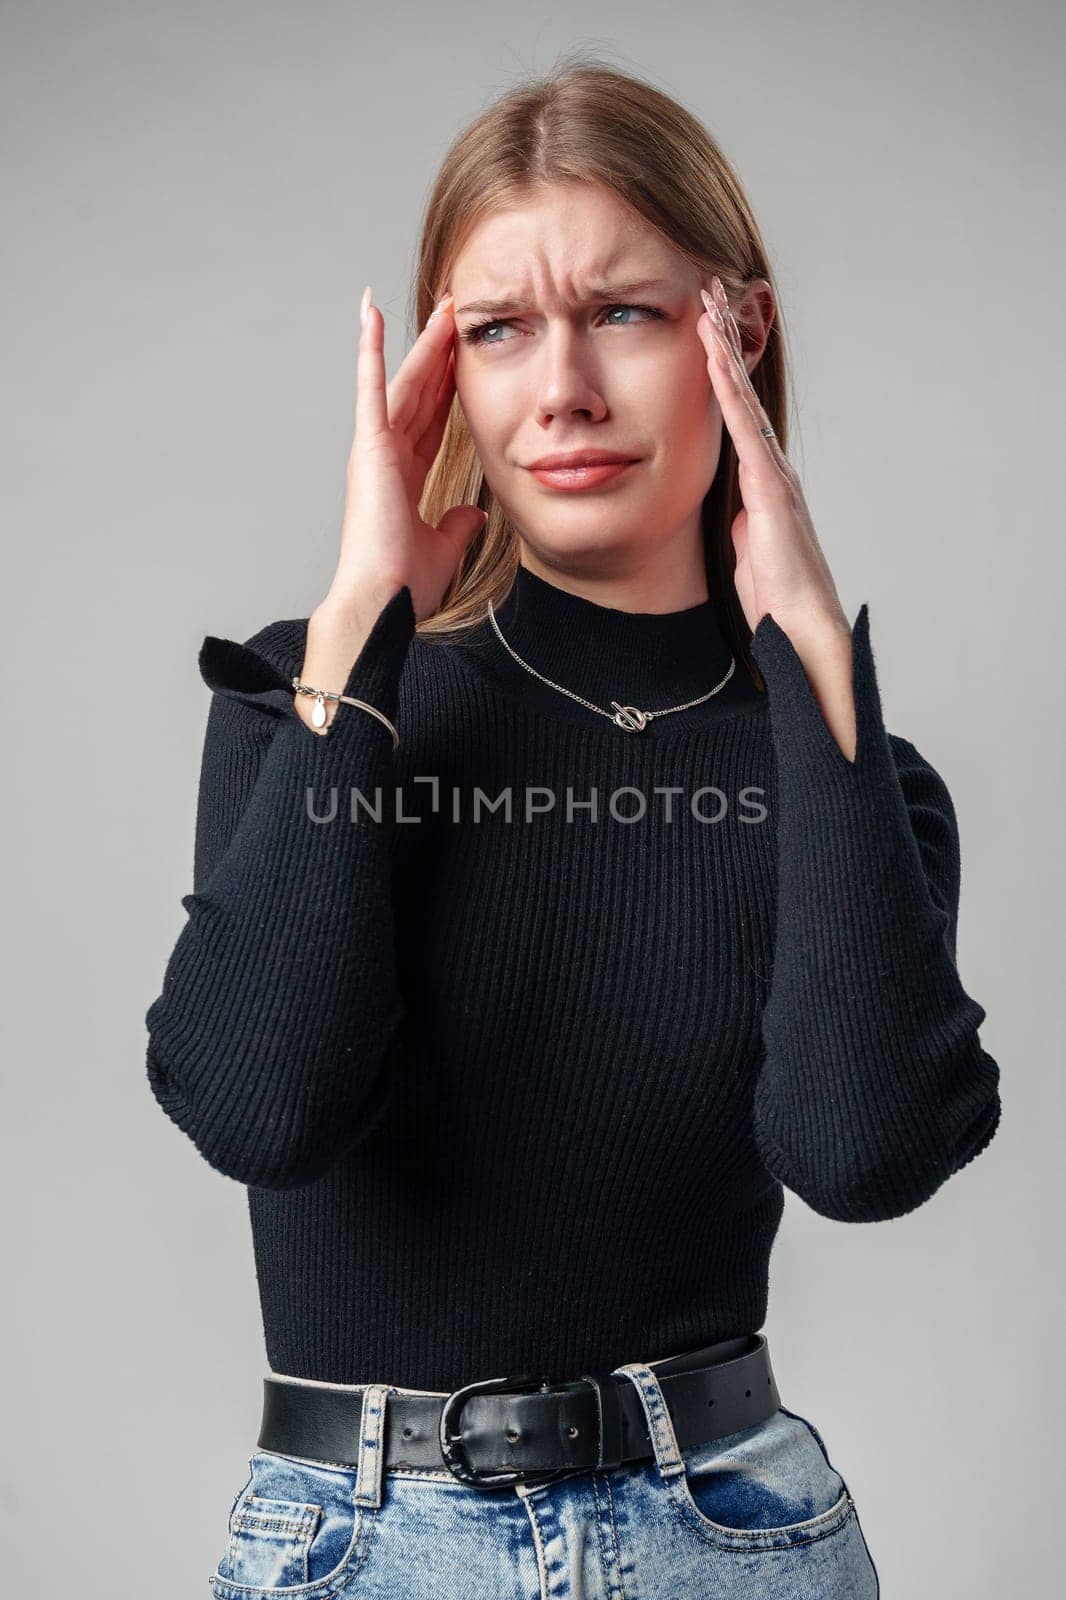 Young Woman In Black Shirt Expressing Discontent Against Grey Background by Fabrikasimf